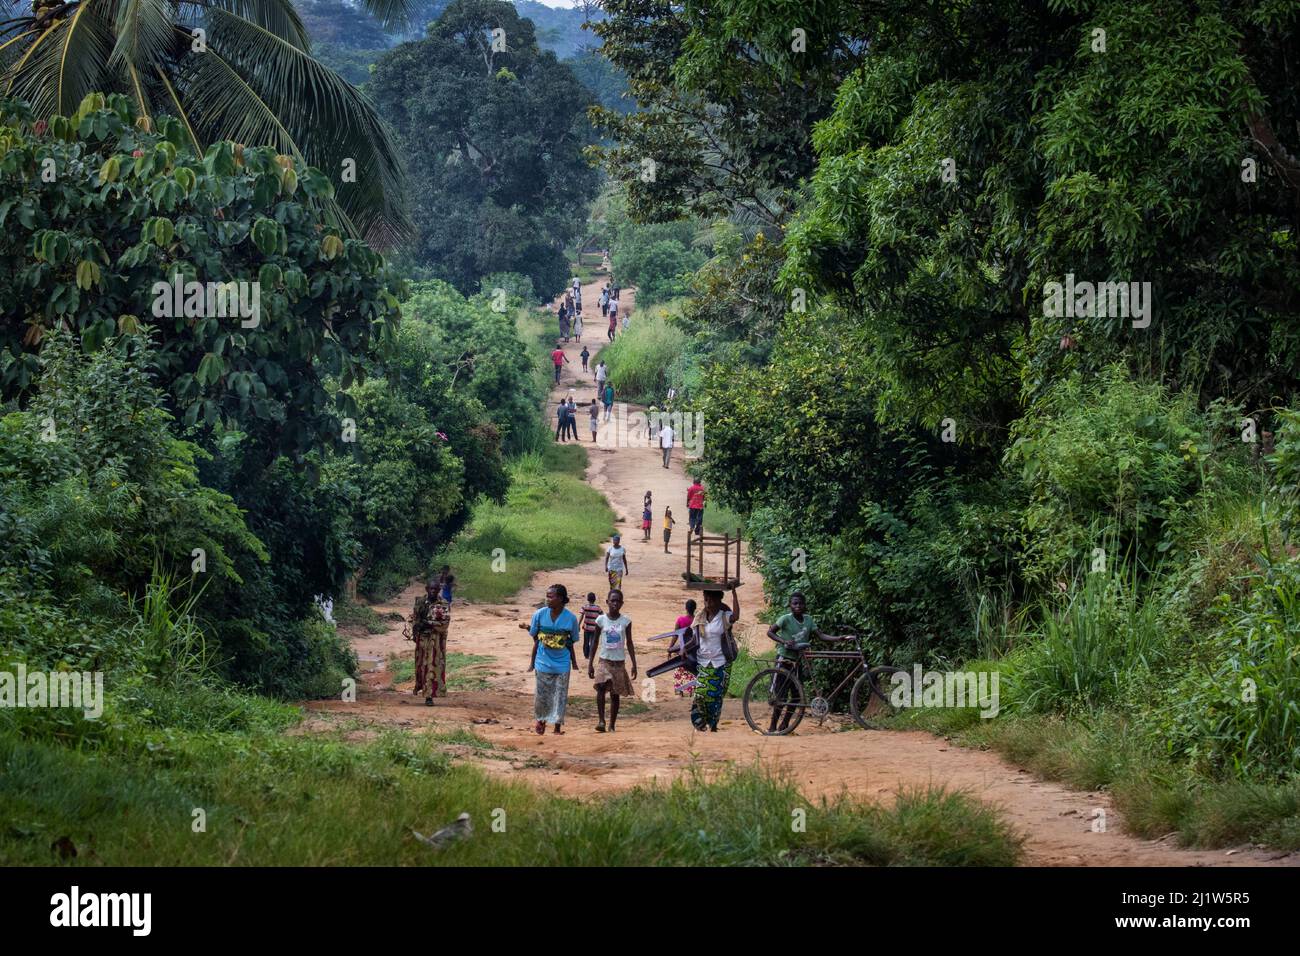 Group of people on busy road, Democratic Republic of Congo. May 2017. Stock Photo